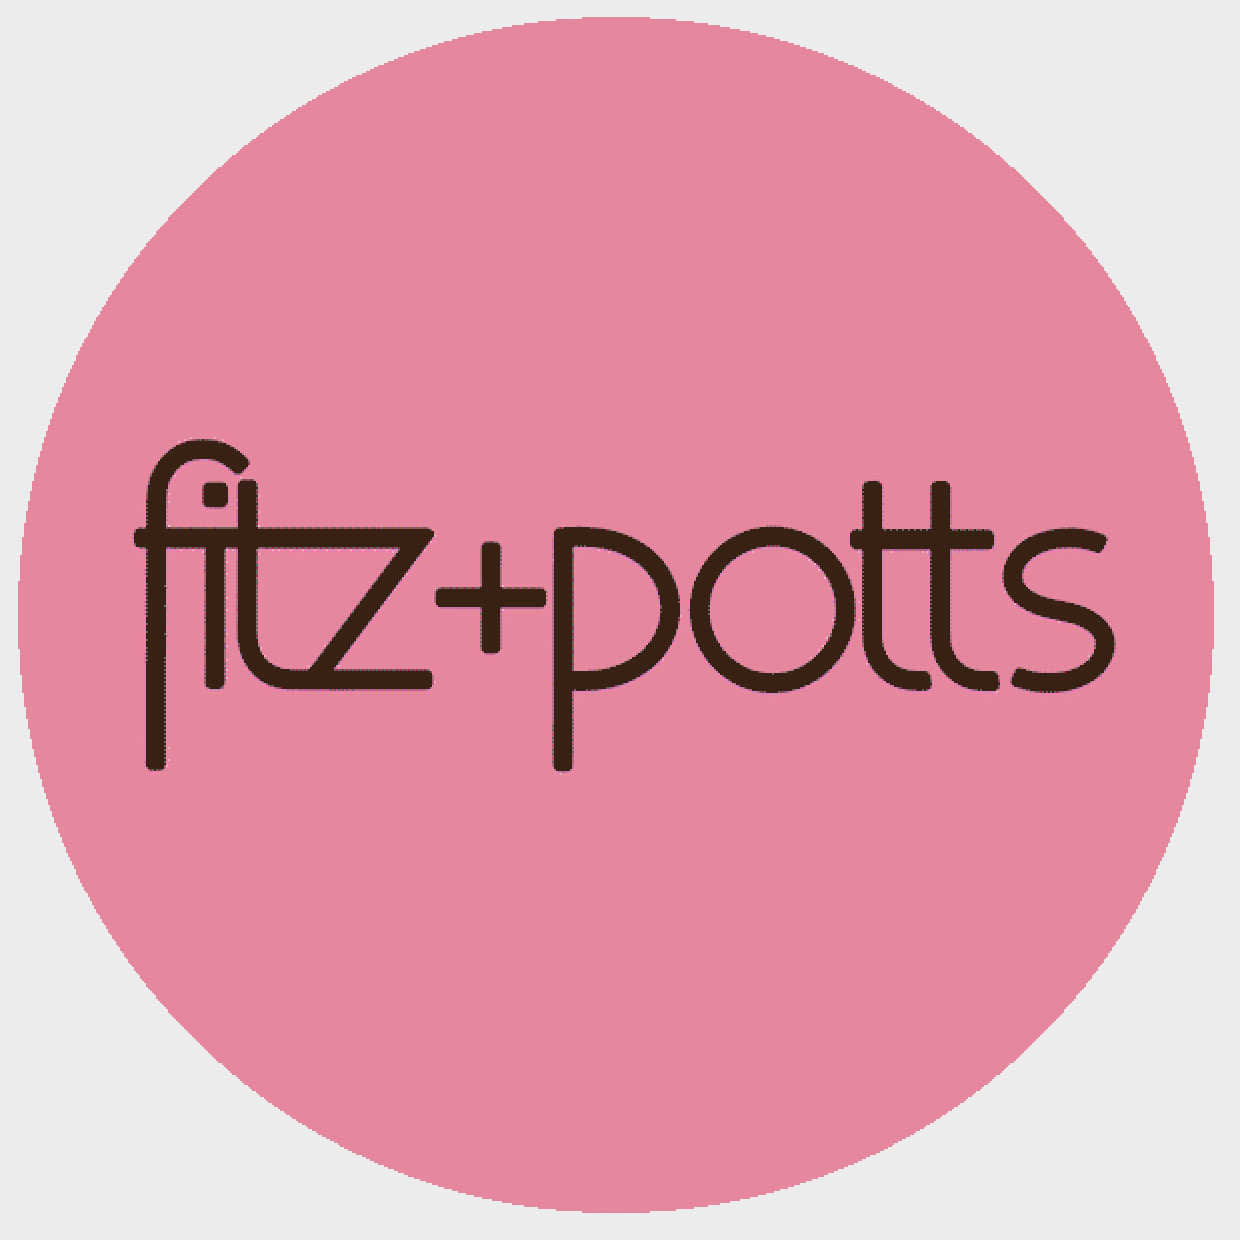 Image for FitzPotts